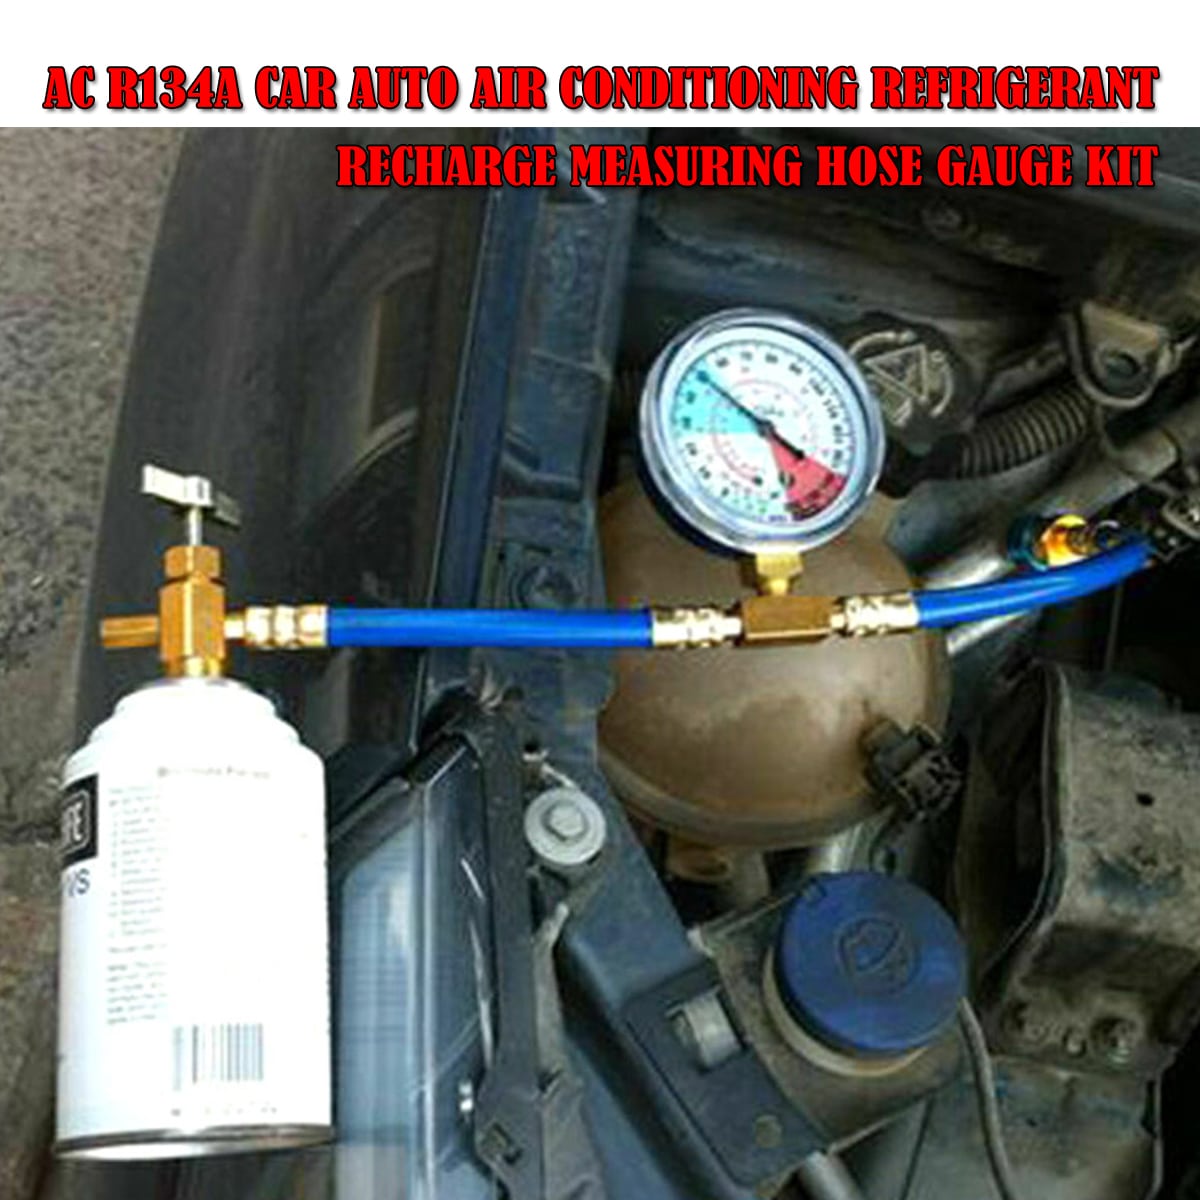 Car Vehicle Air Conditioning Refrigerant Recharge Kit A/C r134a Hose ...